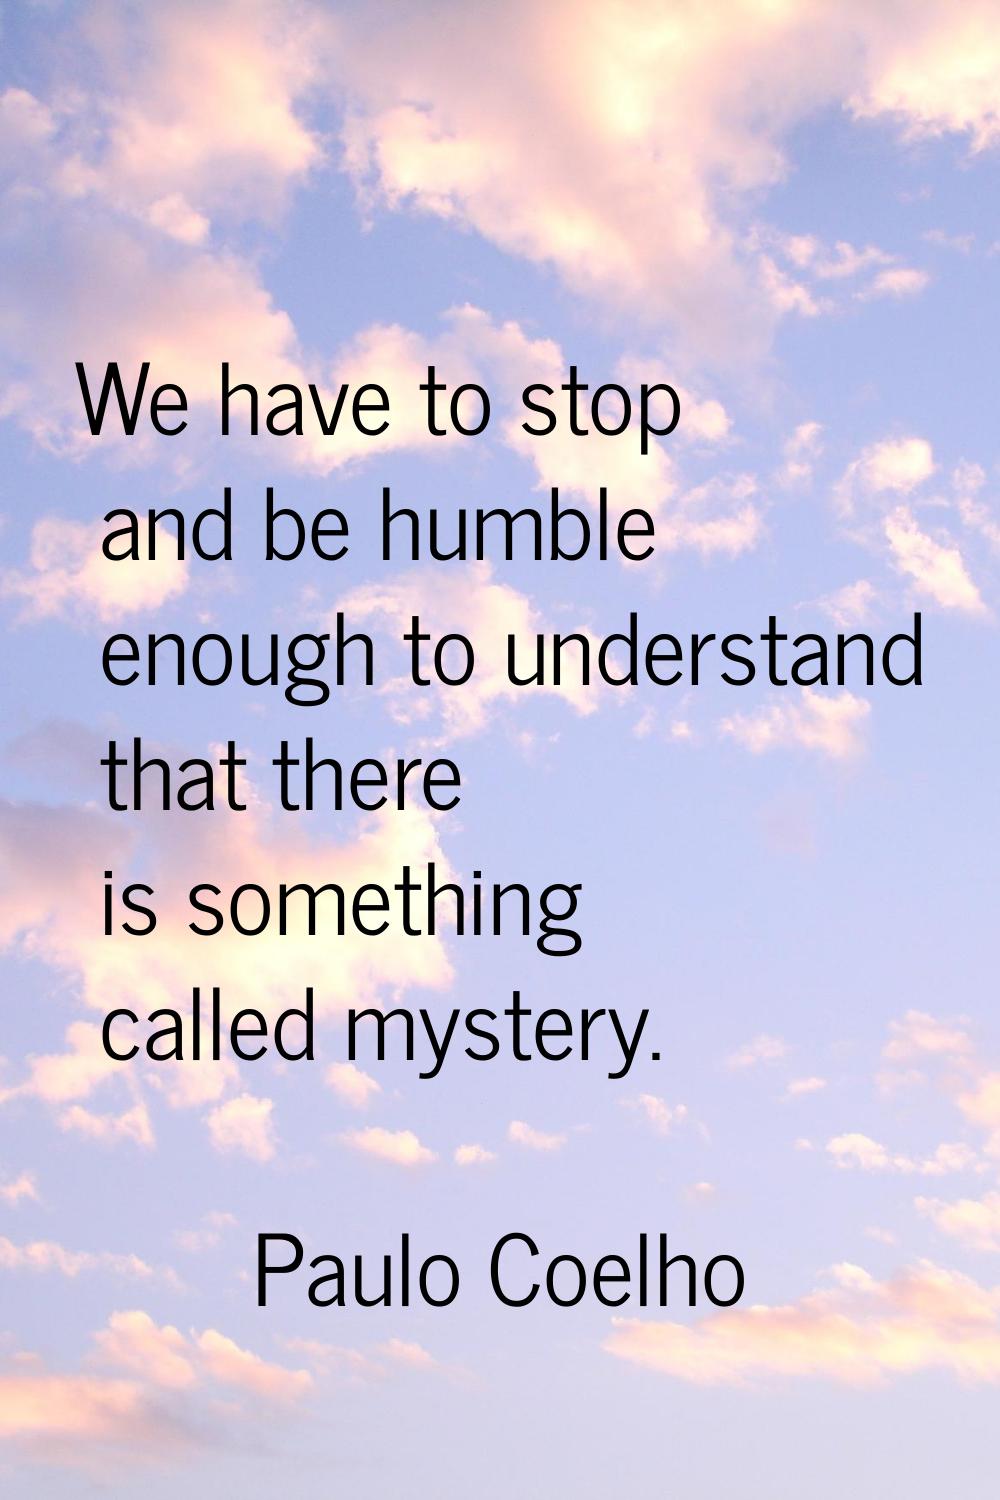 We have to stop and be humble enough to understand that there is something called mystery.